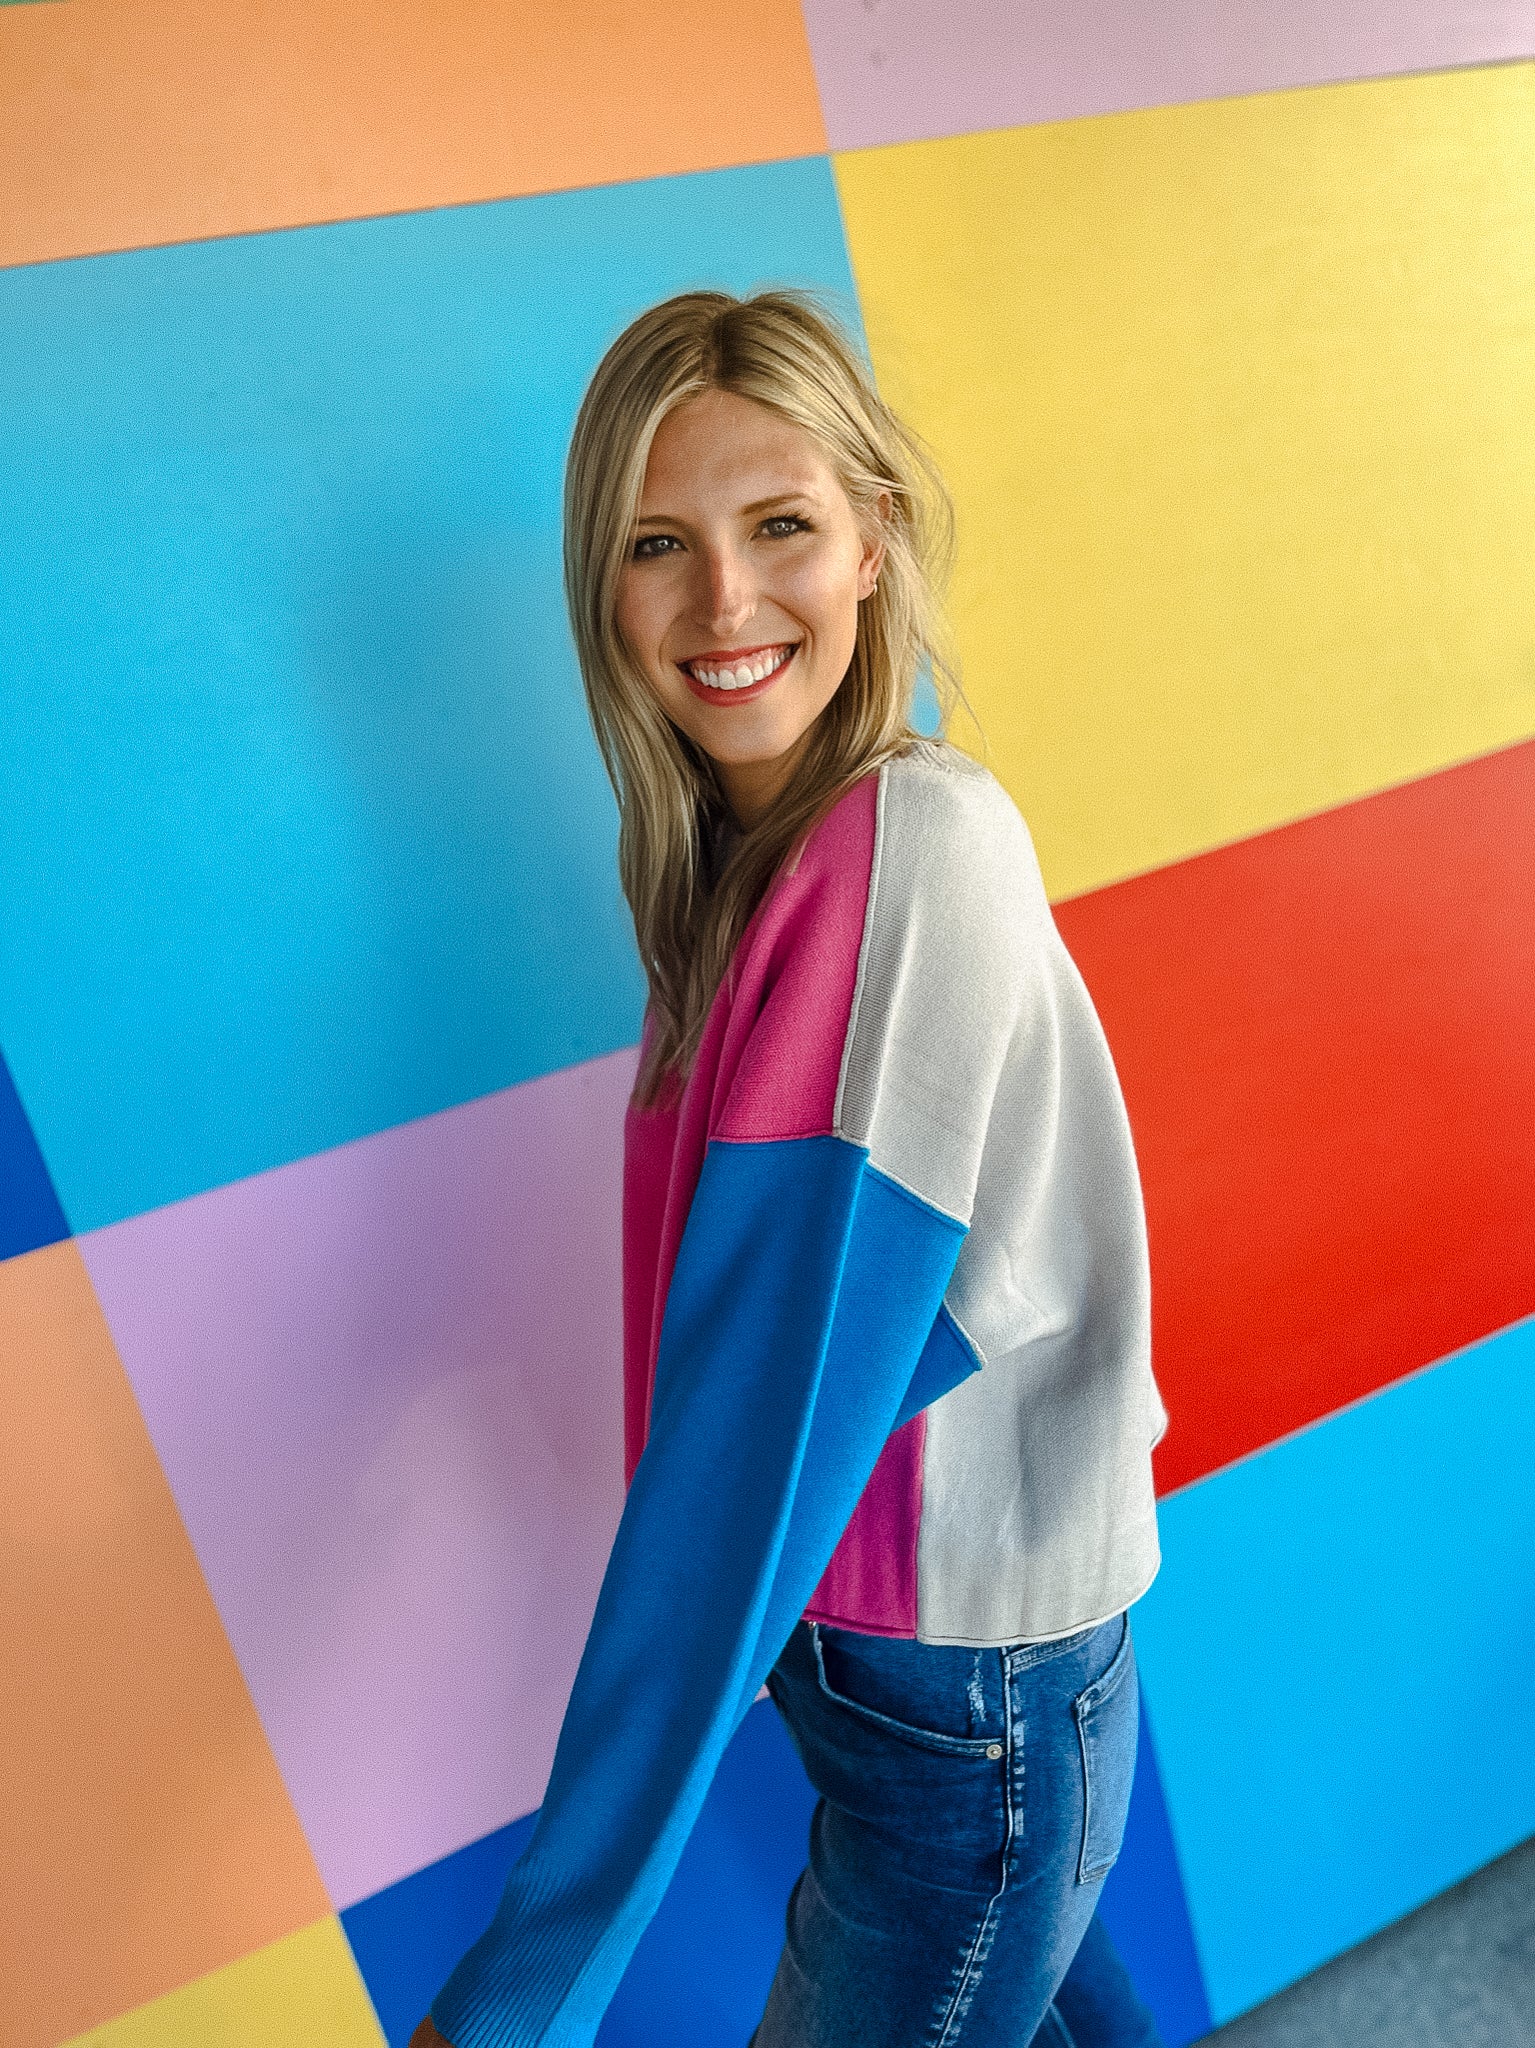 Nell Colorblock Sweater - Shocking Pink + Dove Grey + Turquoise